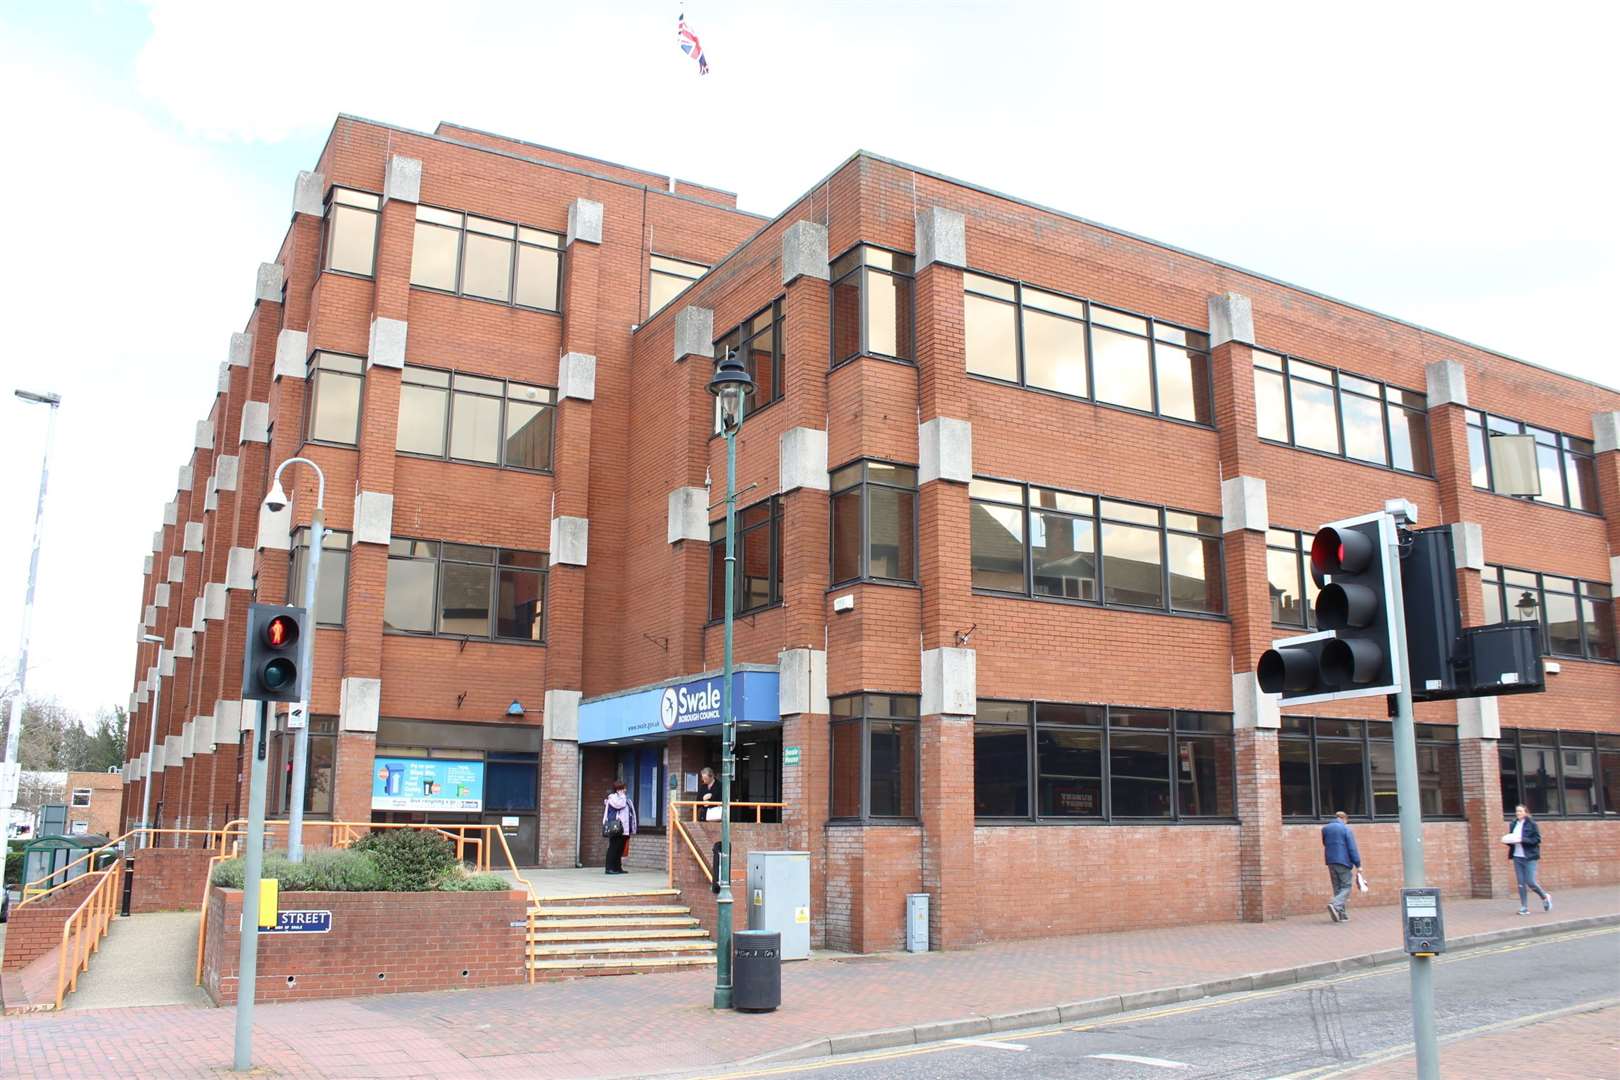 Swale council's headquarters is Swale House in Sittingbourne's East Street